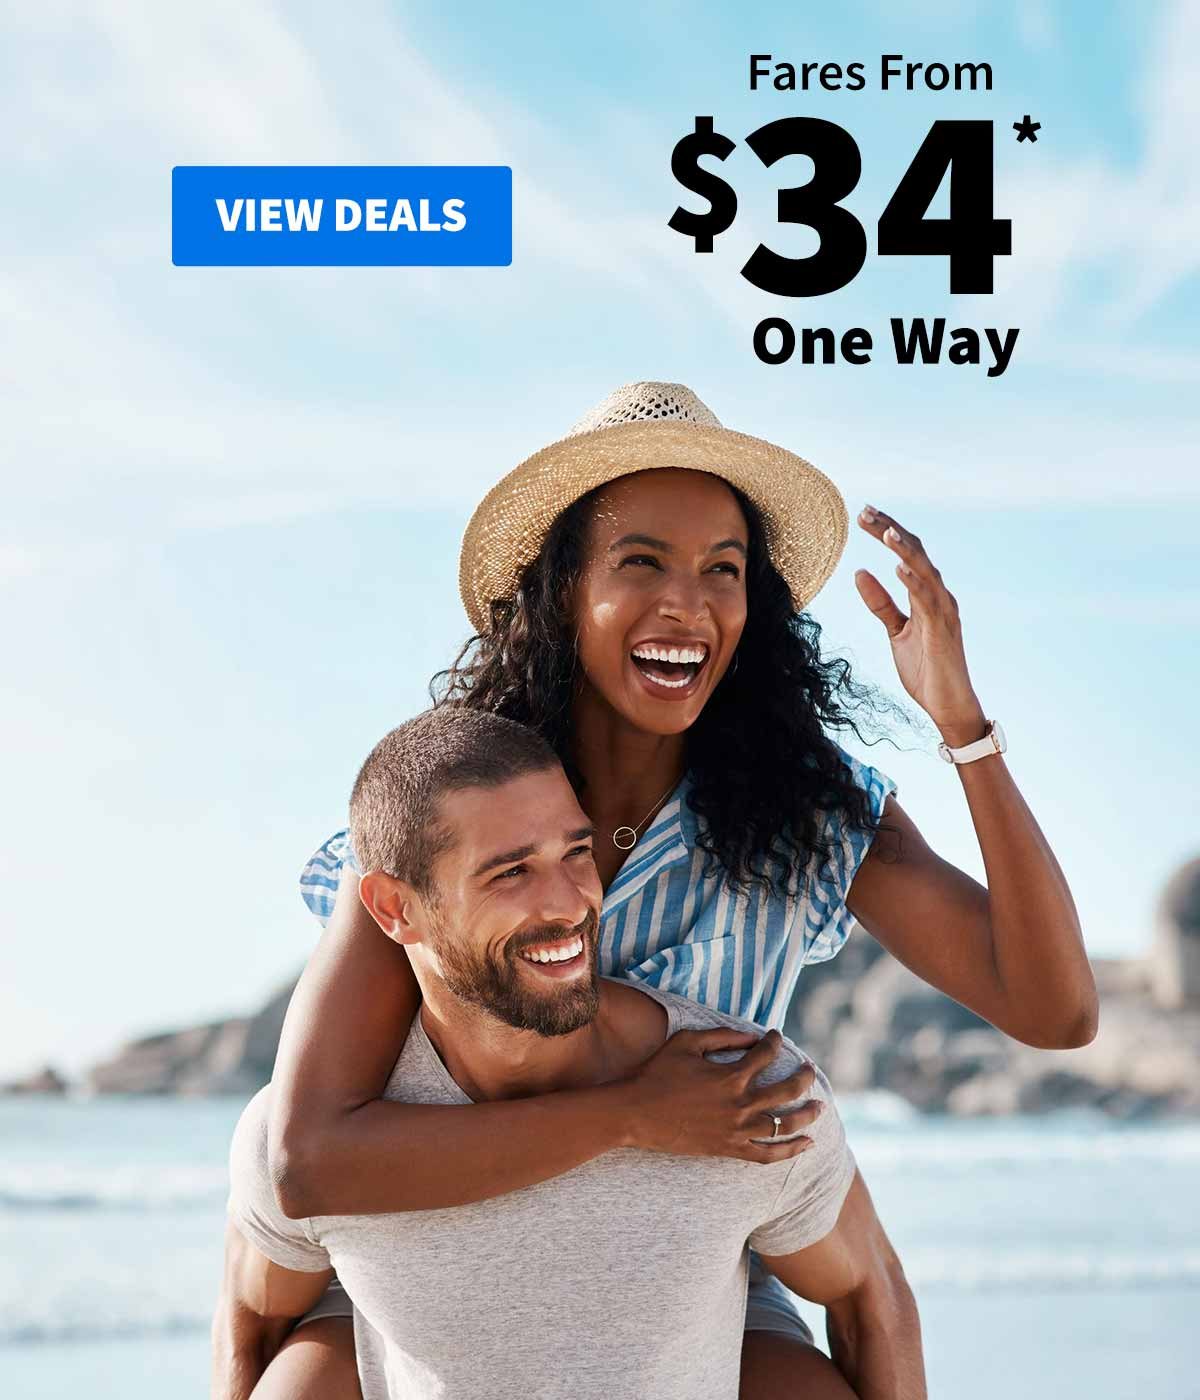 Fares From $34* One Way